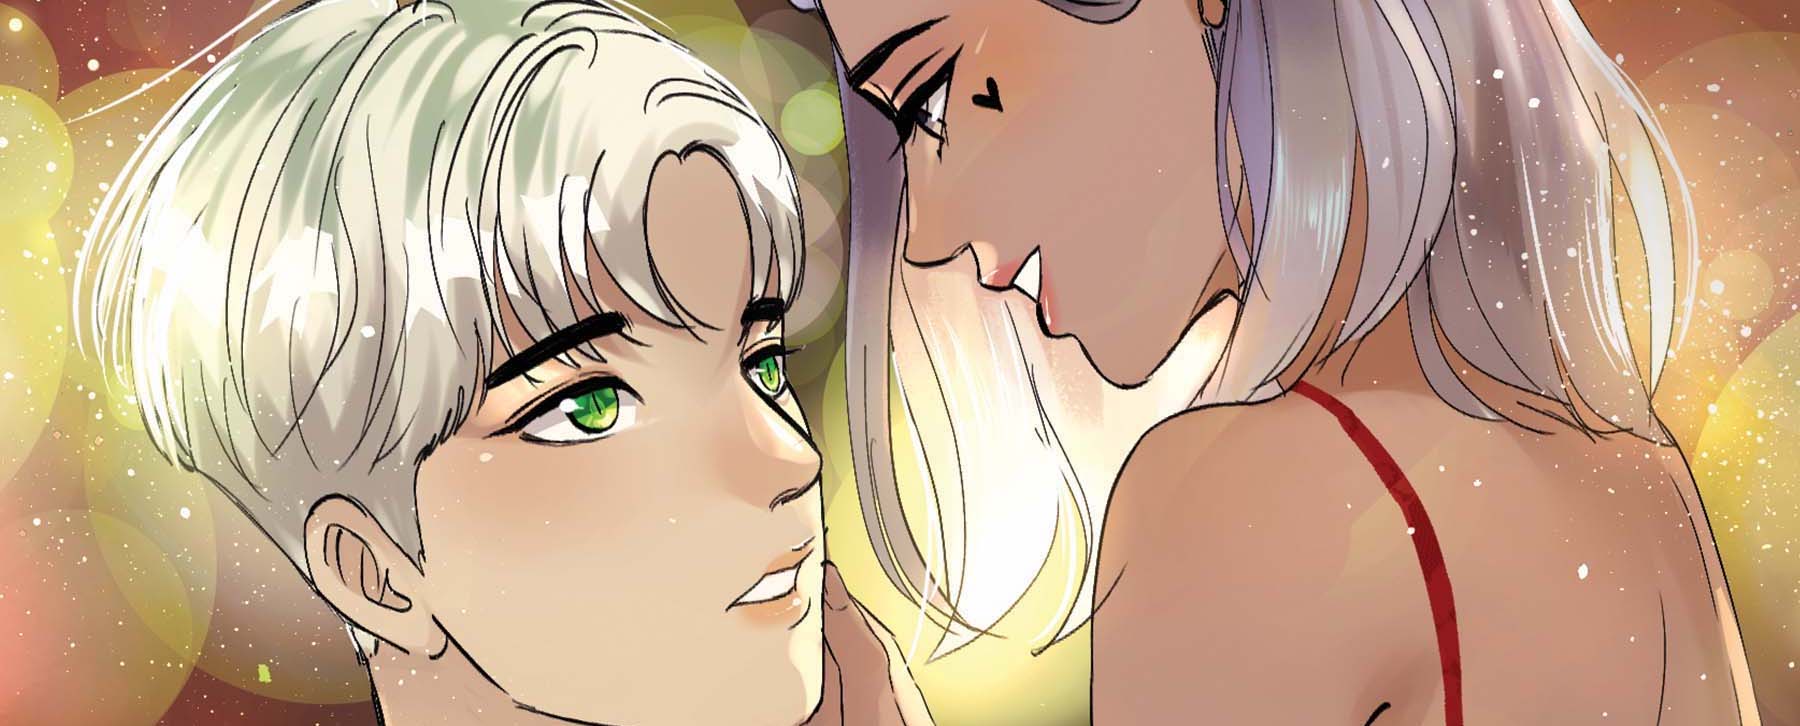 EXCLUSIVE Webtoon First Look: Freaking Romance Vol. 2 by Snailords